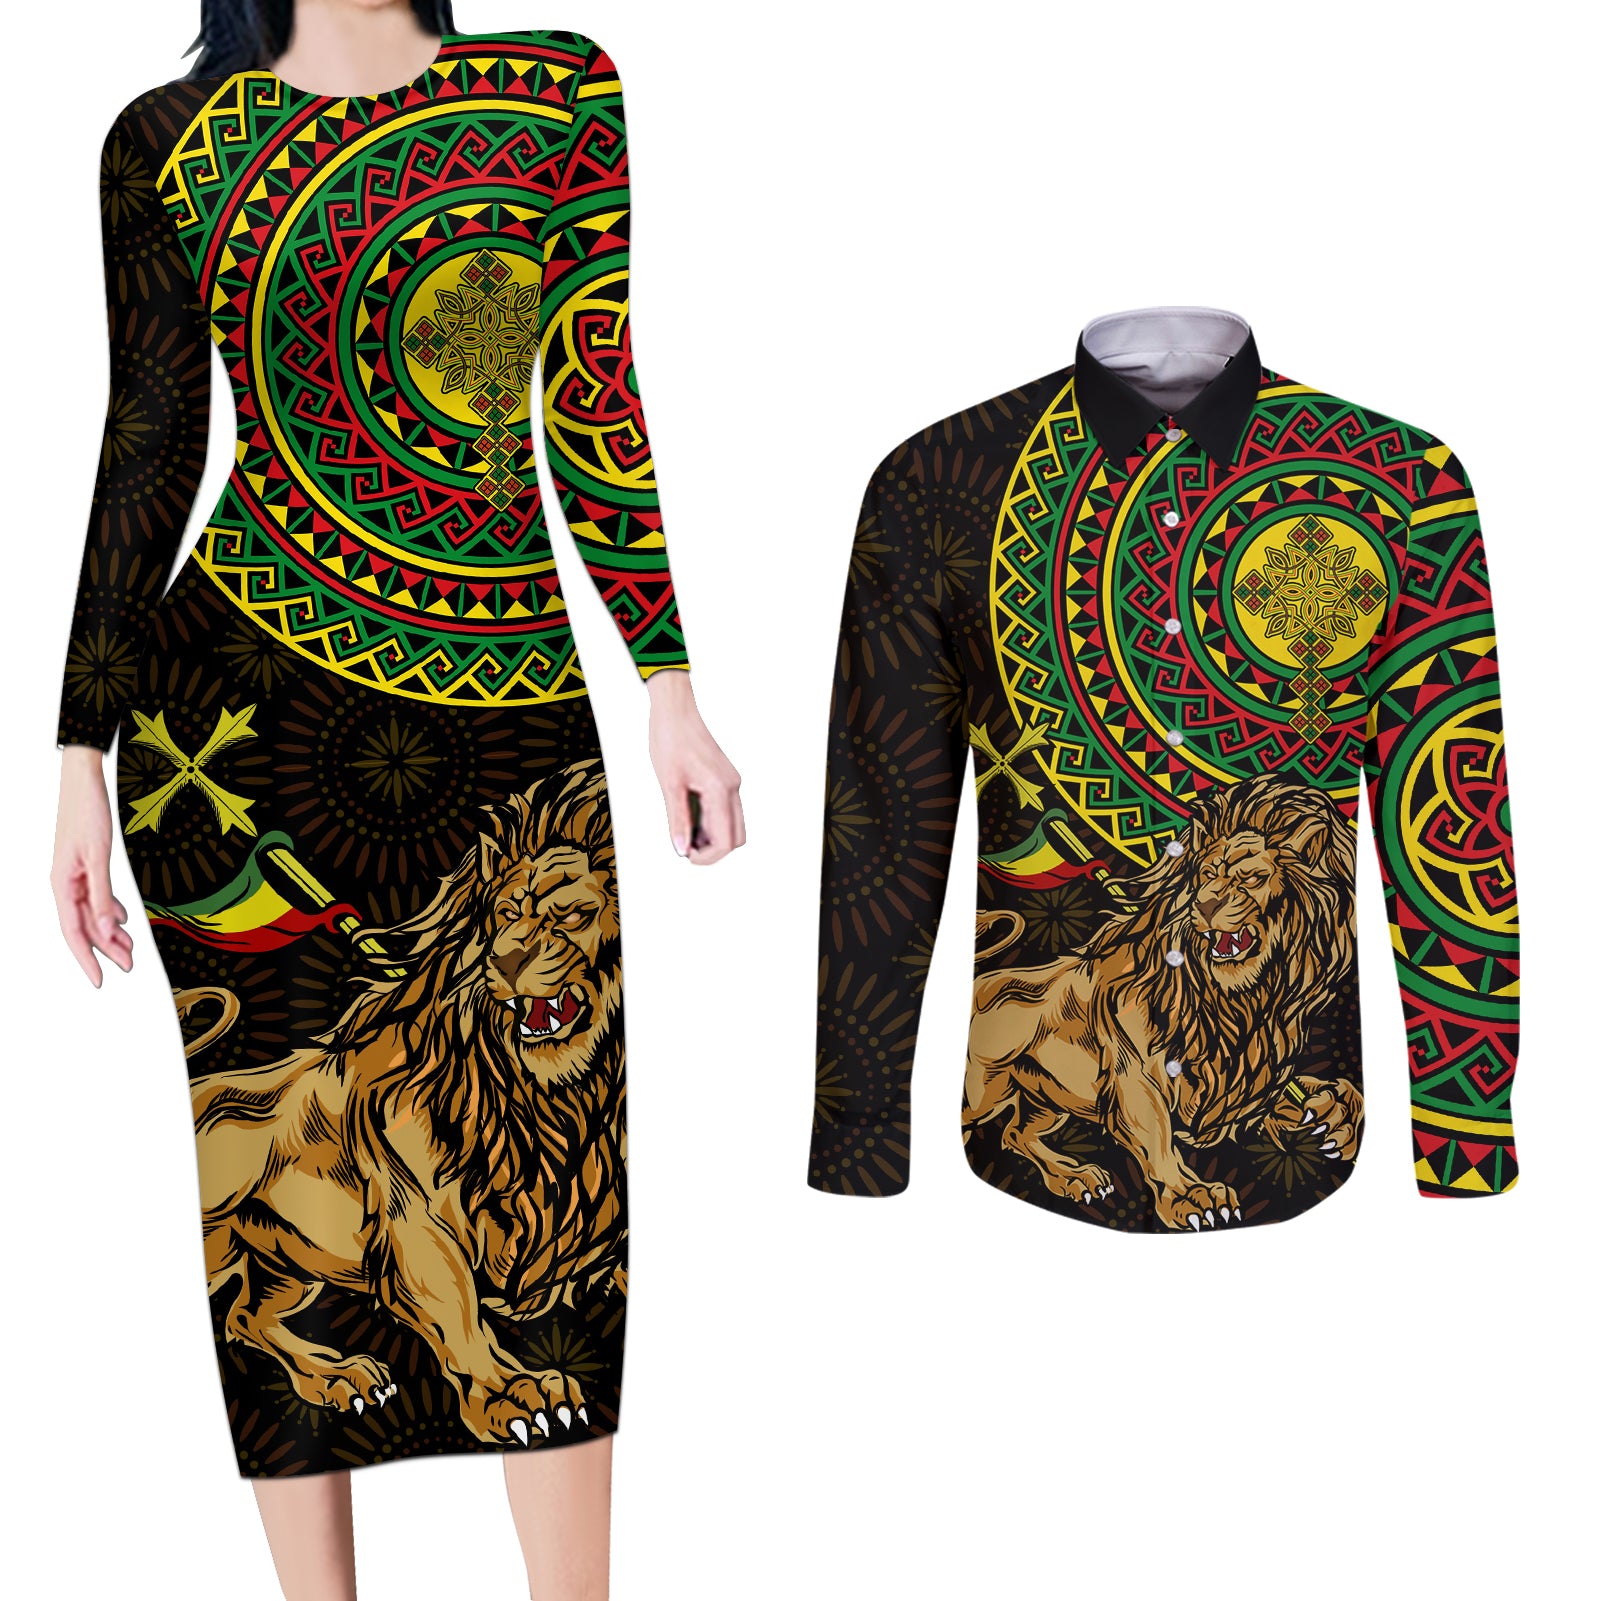 Ethiopia National Day Couples Matching Long Sleeve Bodycon Dress and Long Sleeve Button Shirt Lion Of Judah African Pattern